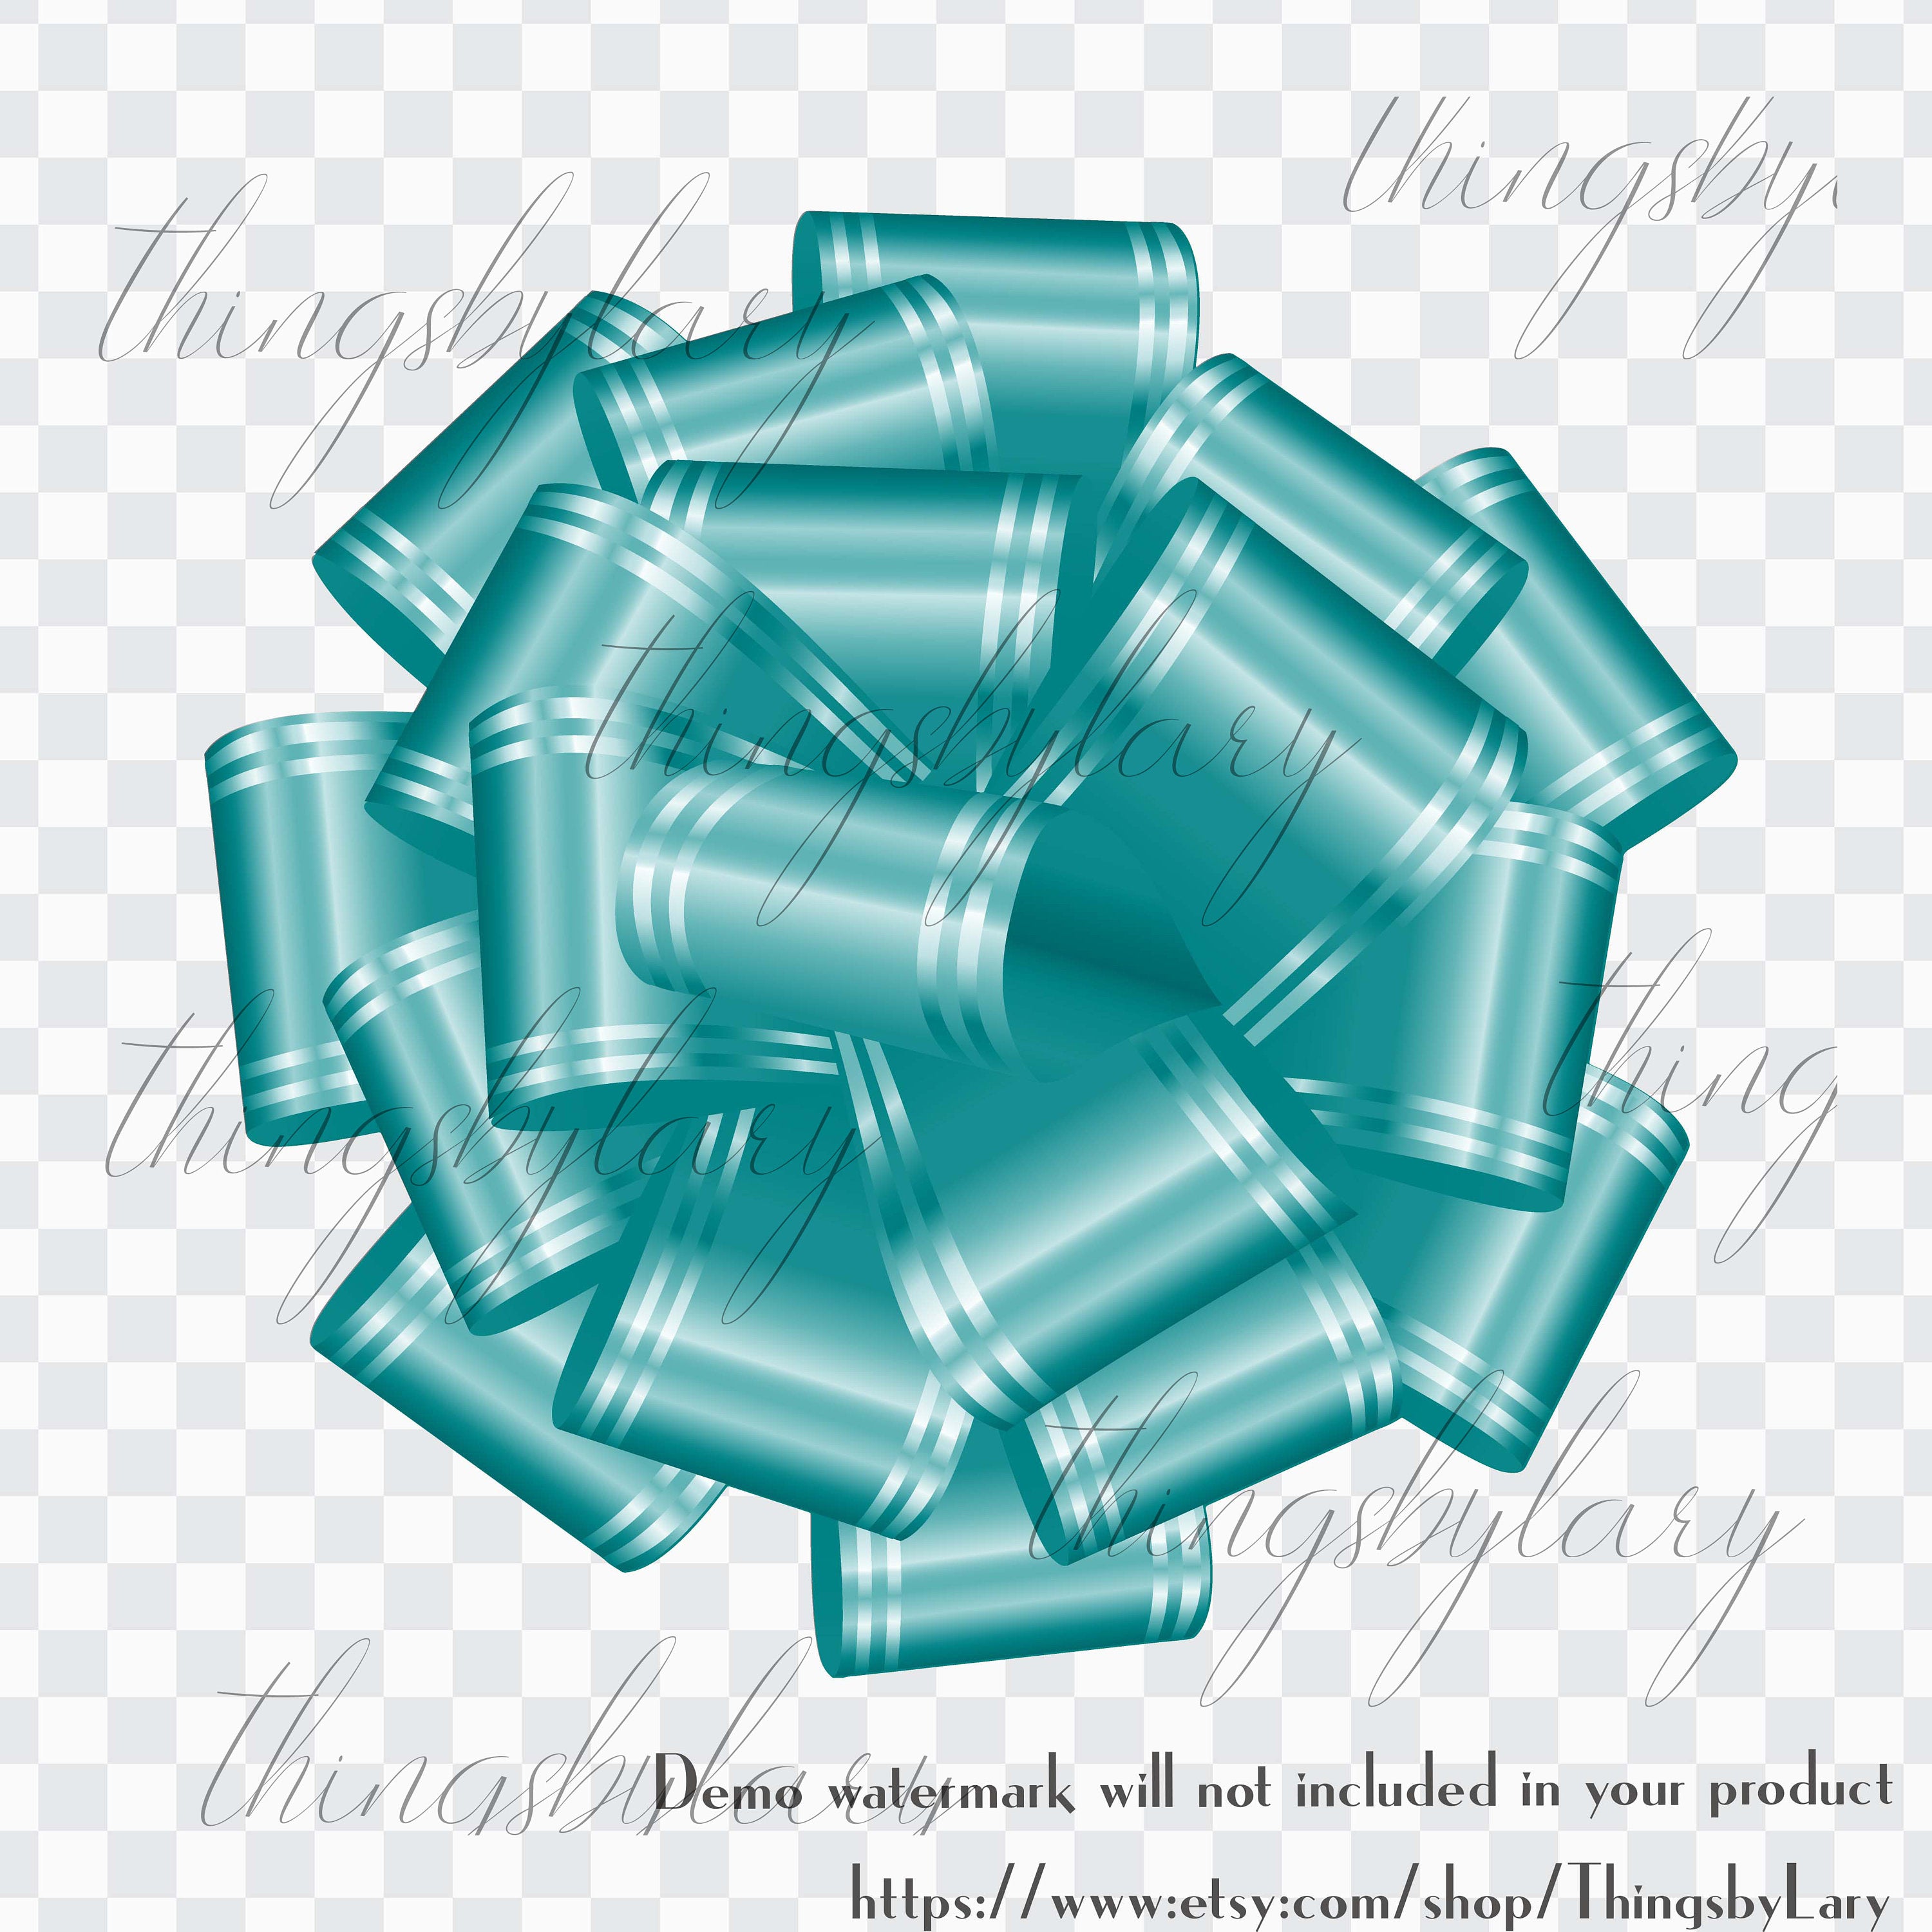 56 Teal Bows and Ribbons Cliparts, 300 Dpi, Instant Download, Commercial Use, Bridal Shower, Digital Bows, Wedding Invitation, Satin Bows